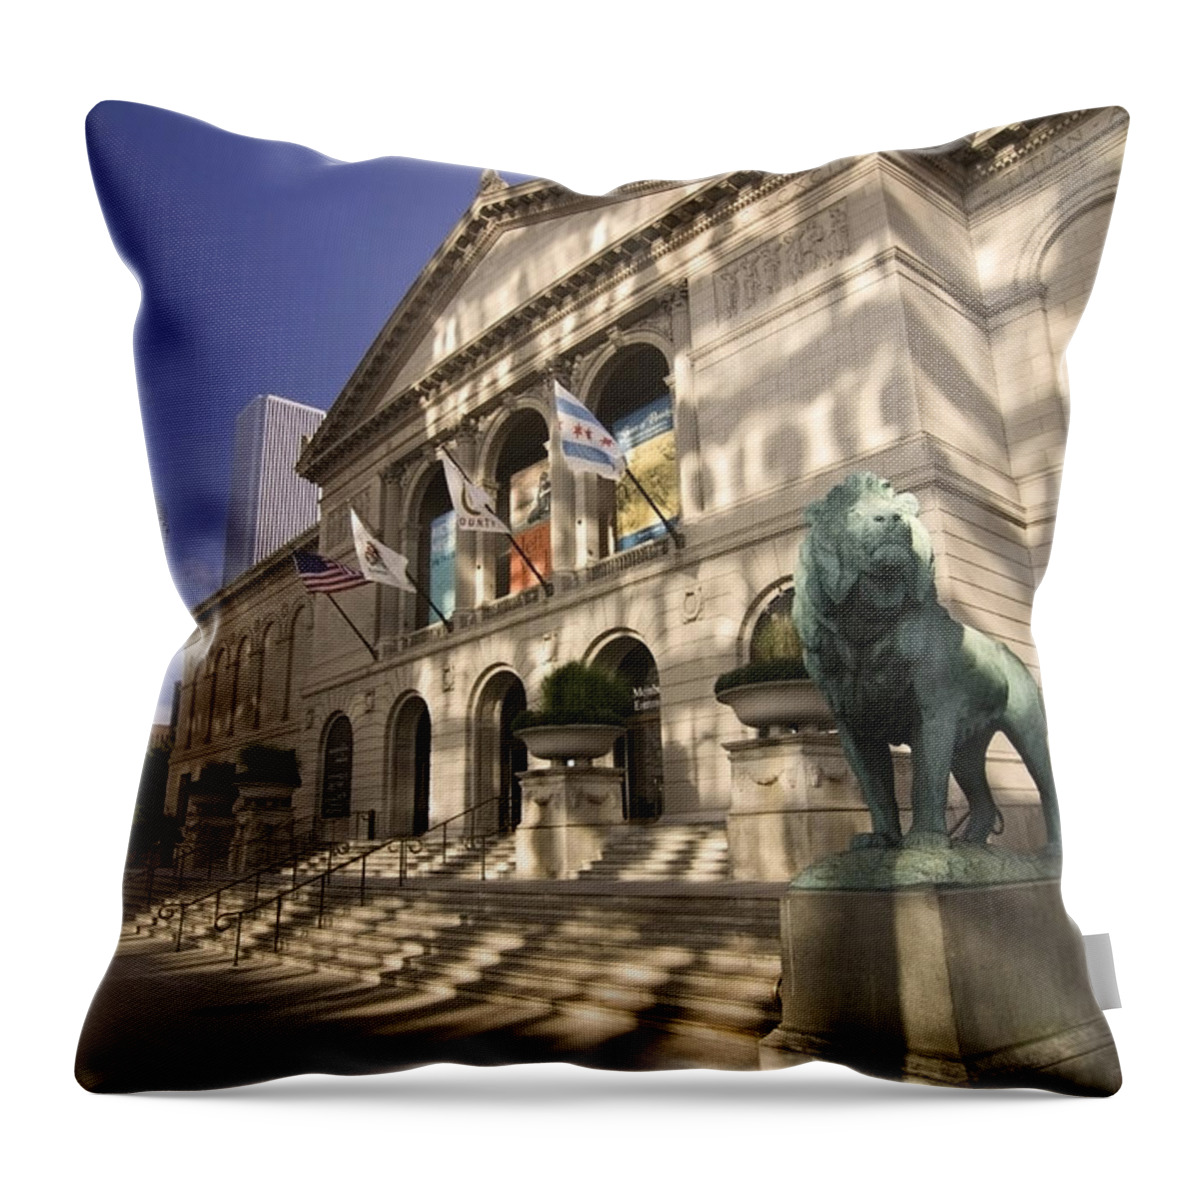 Chicago Art Institute Throw Pillow featuring the photograph Chicago's Art Institute In reflected light. by Sven Brogren